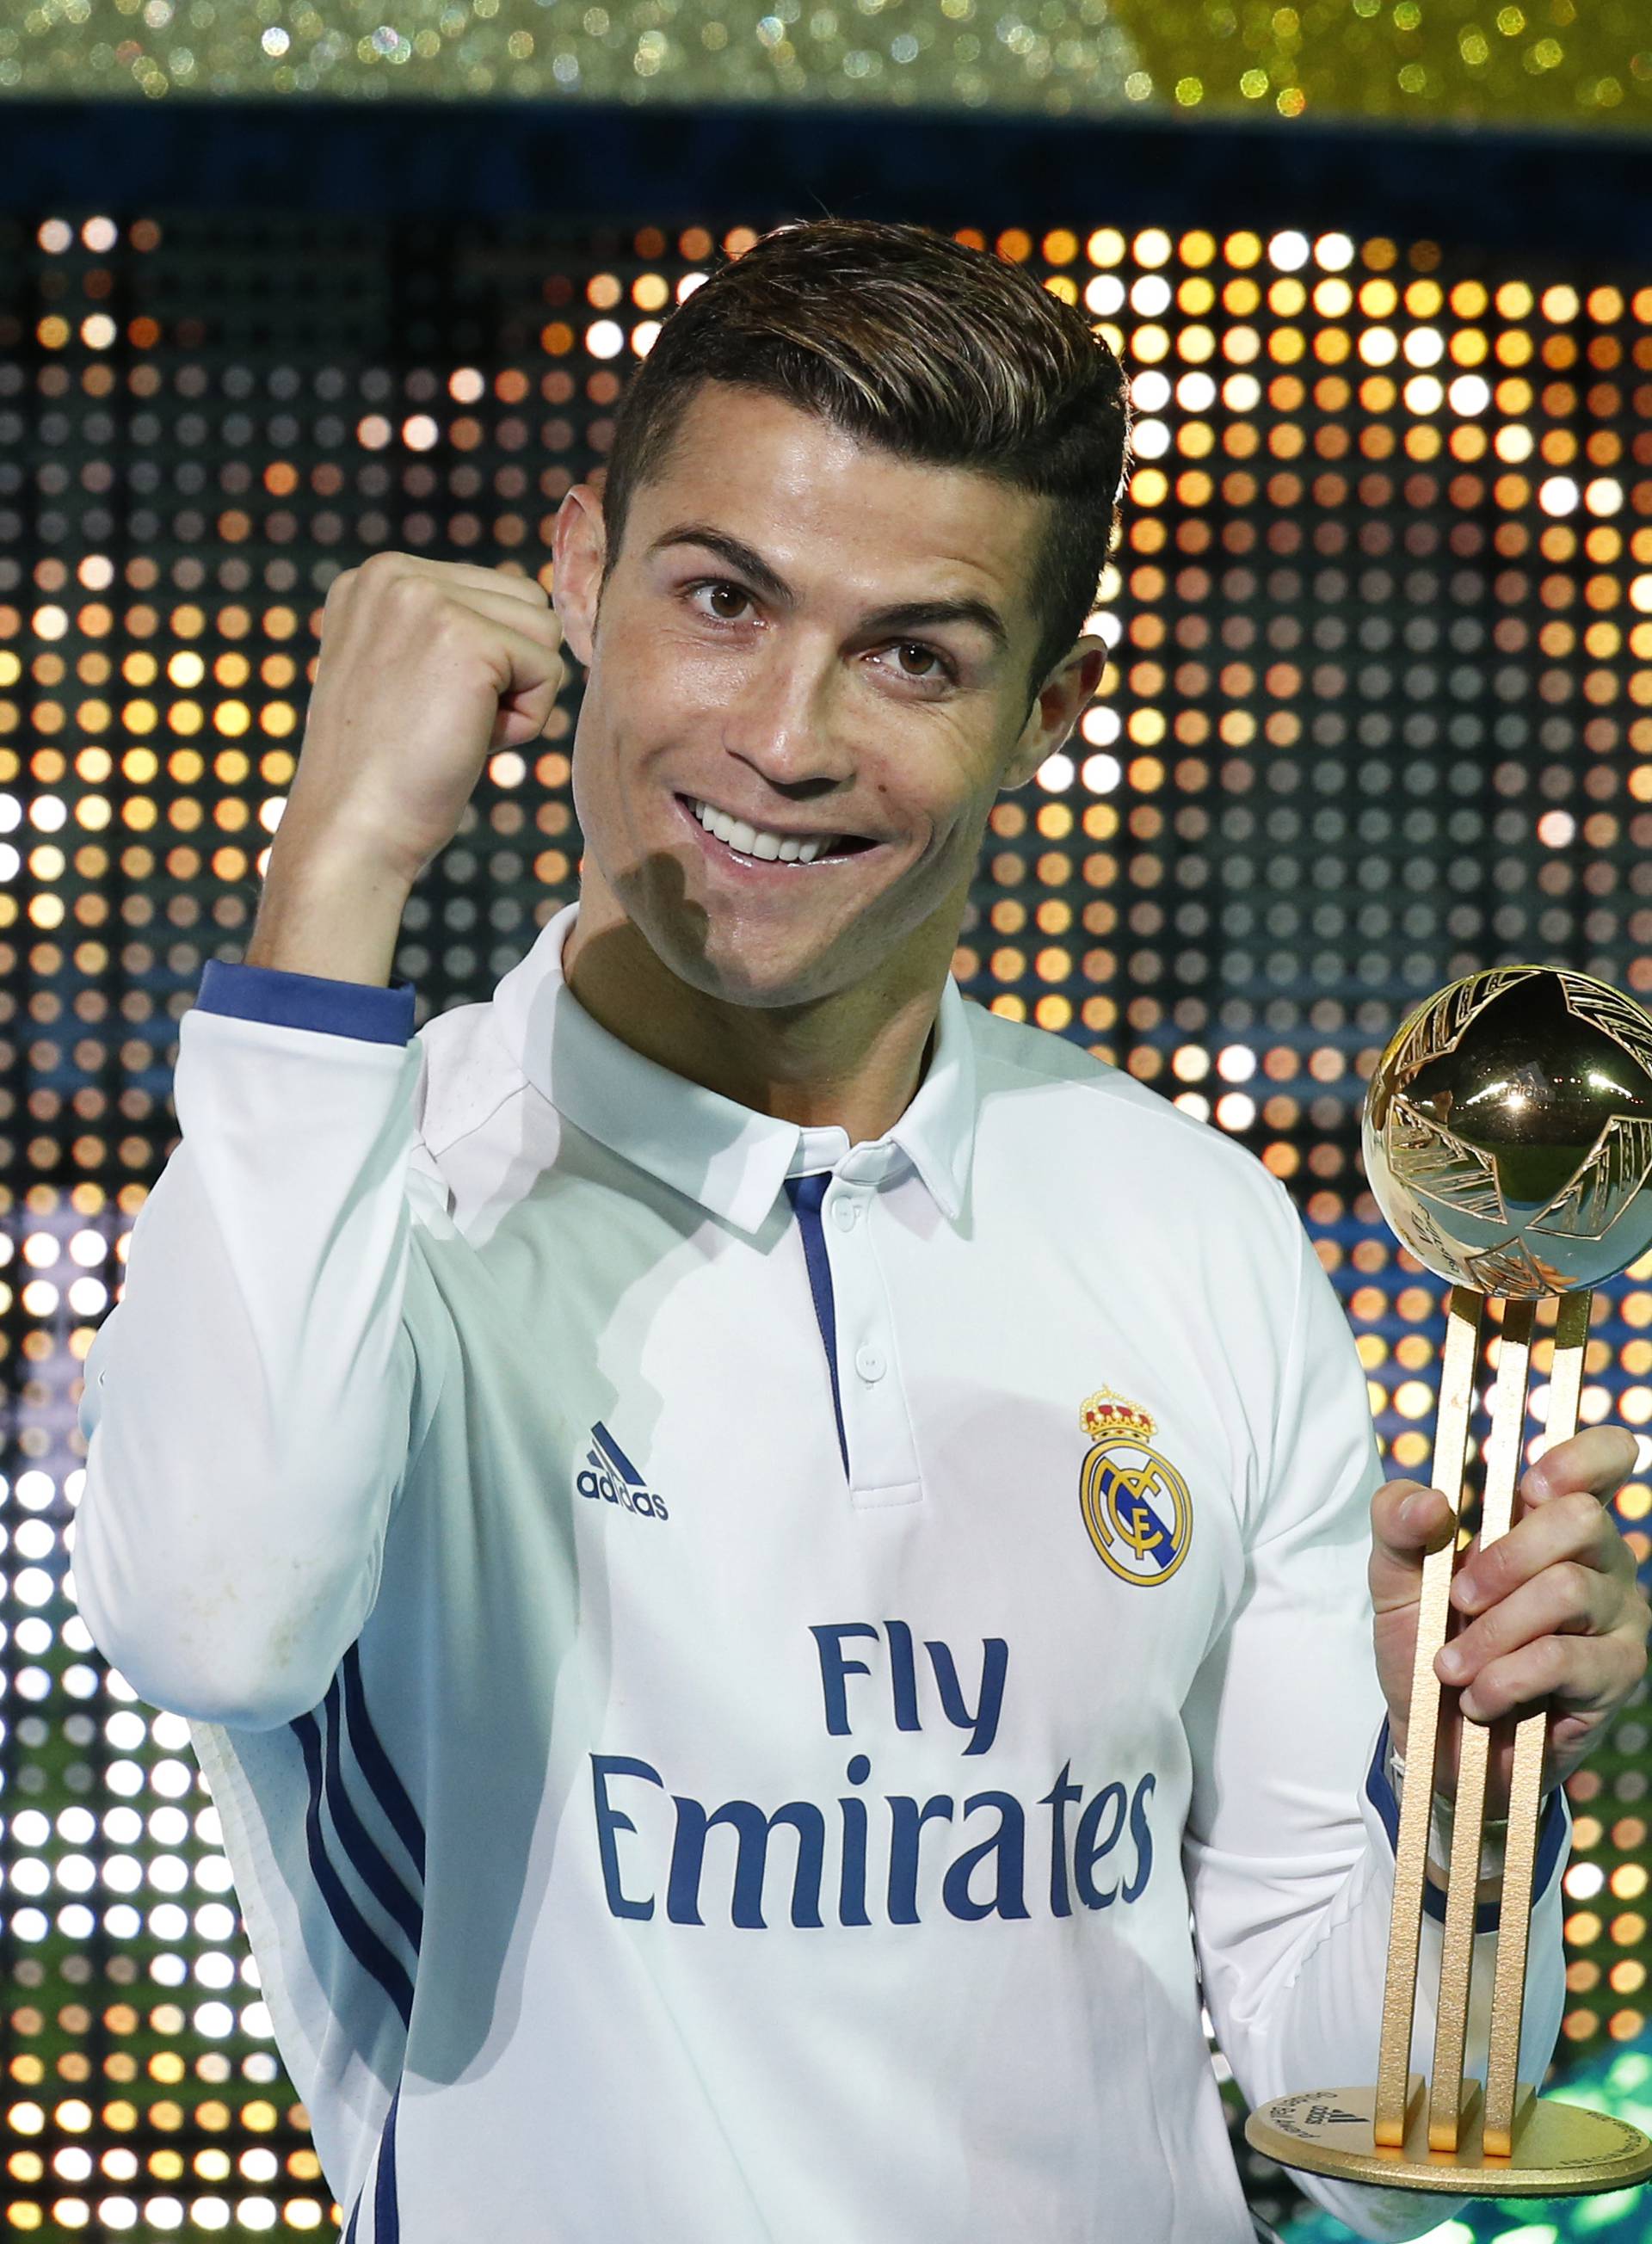 Real Madrid's Cristiano Ronaldo celebrates with the Golden Ball trophy